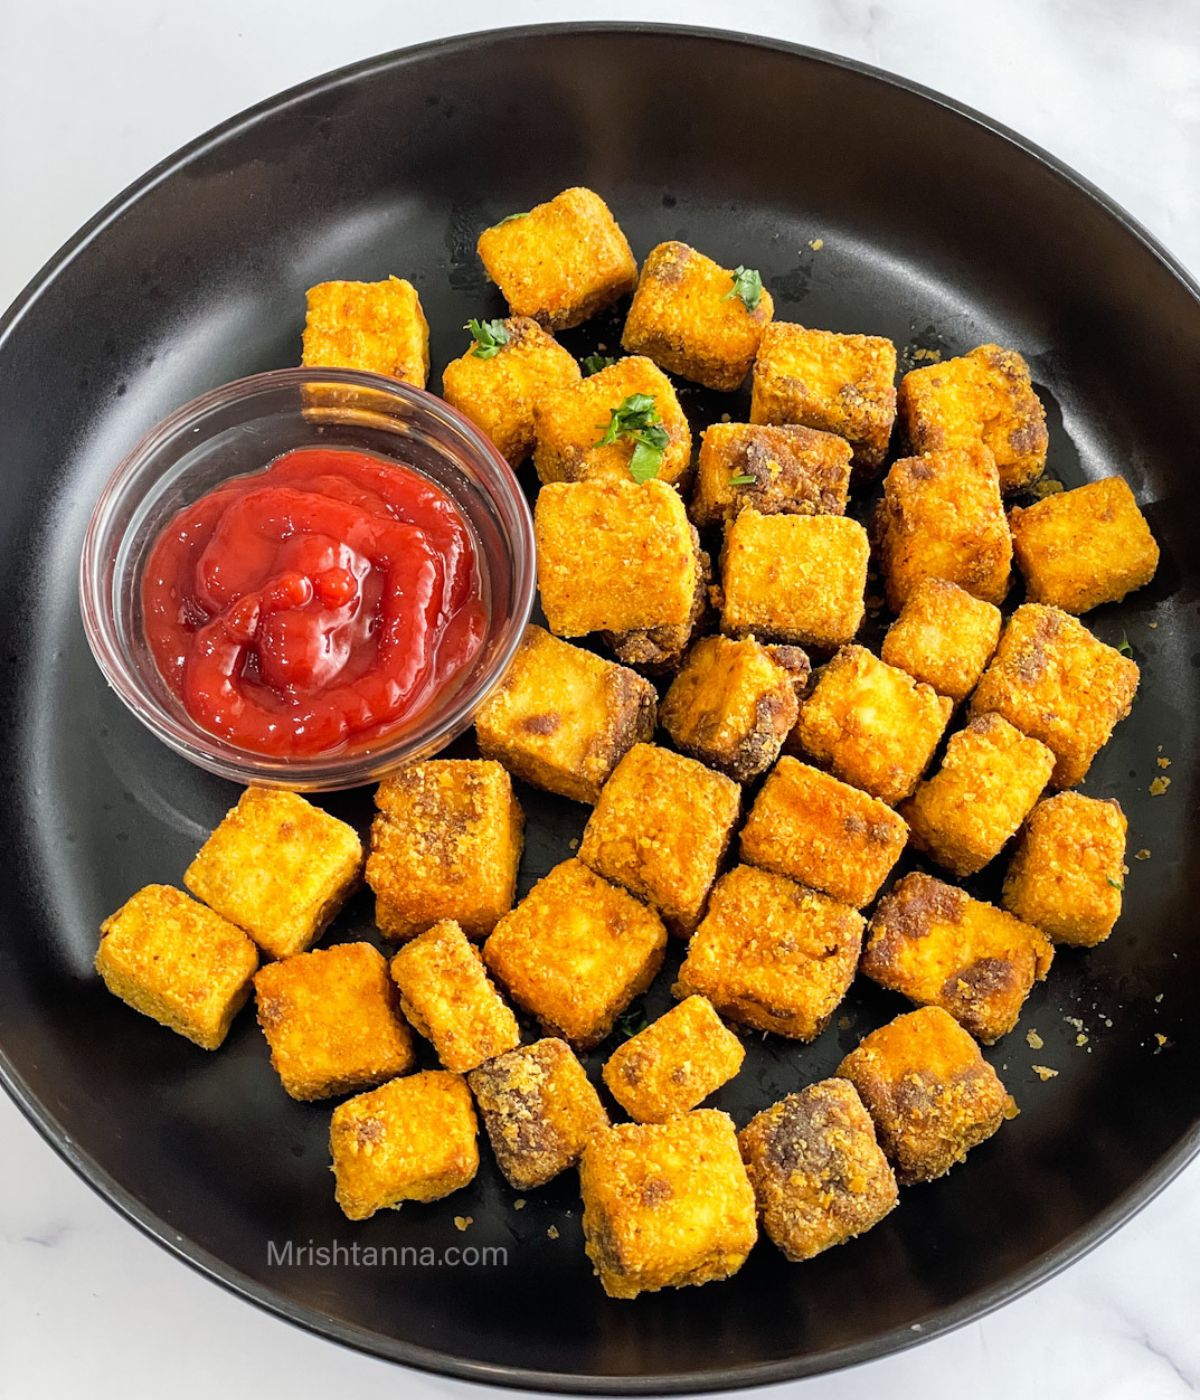 A plate of air fryer tofu nuggets and a bowl with ketchup is on the table.